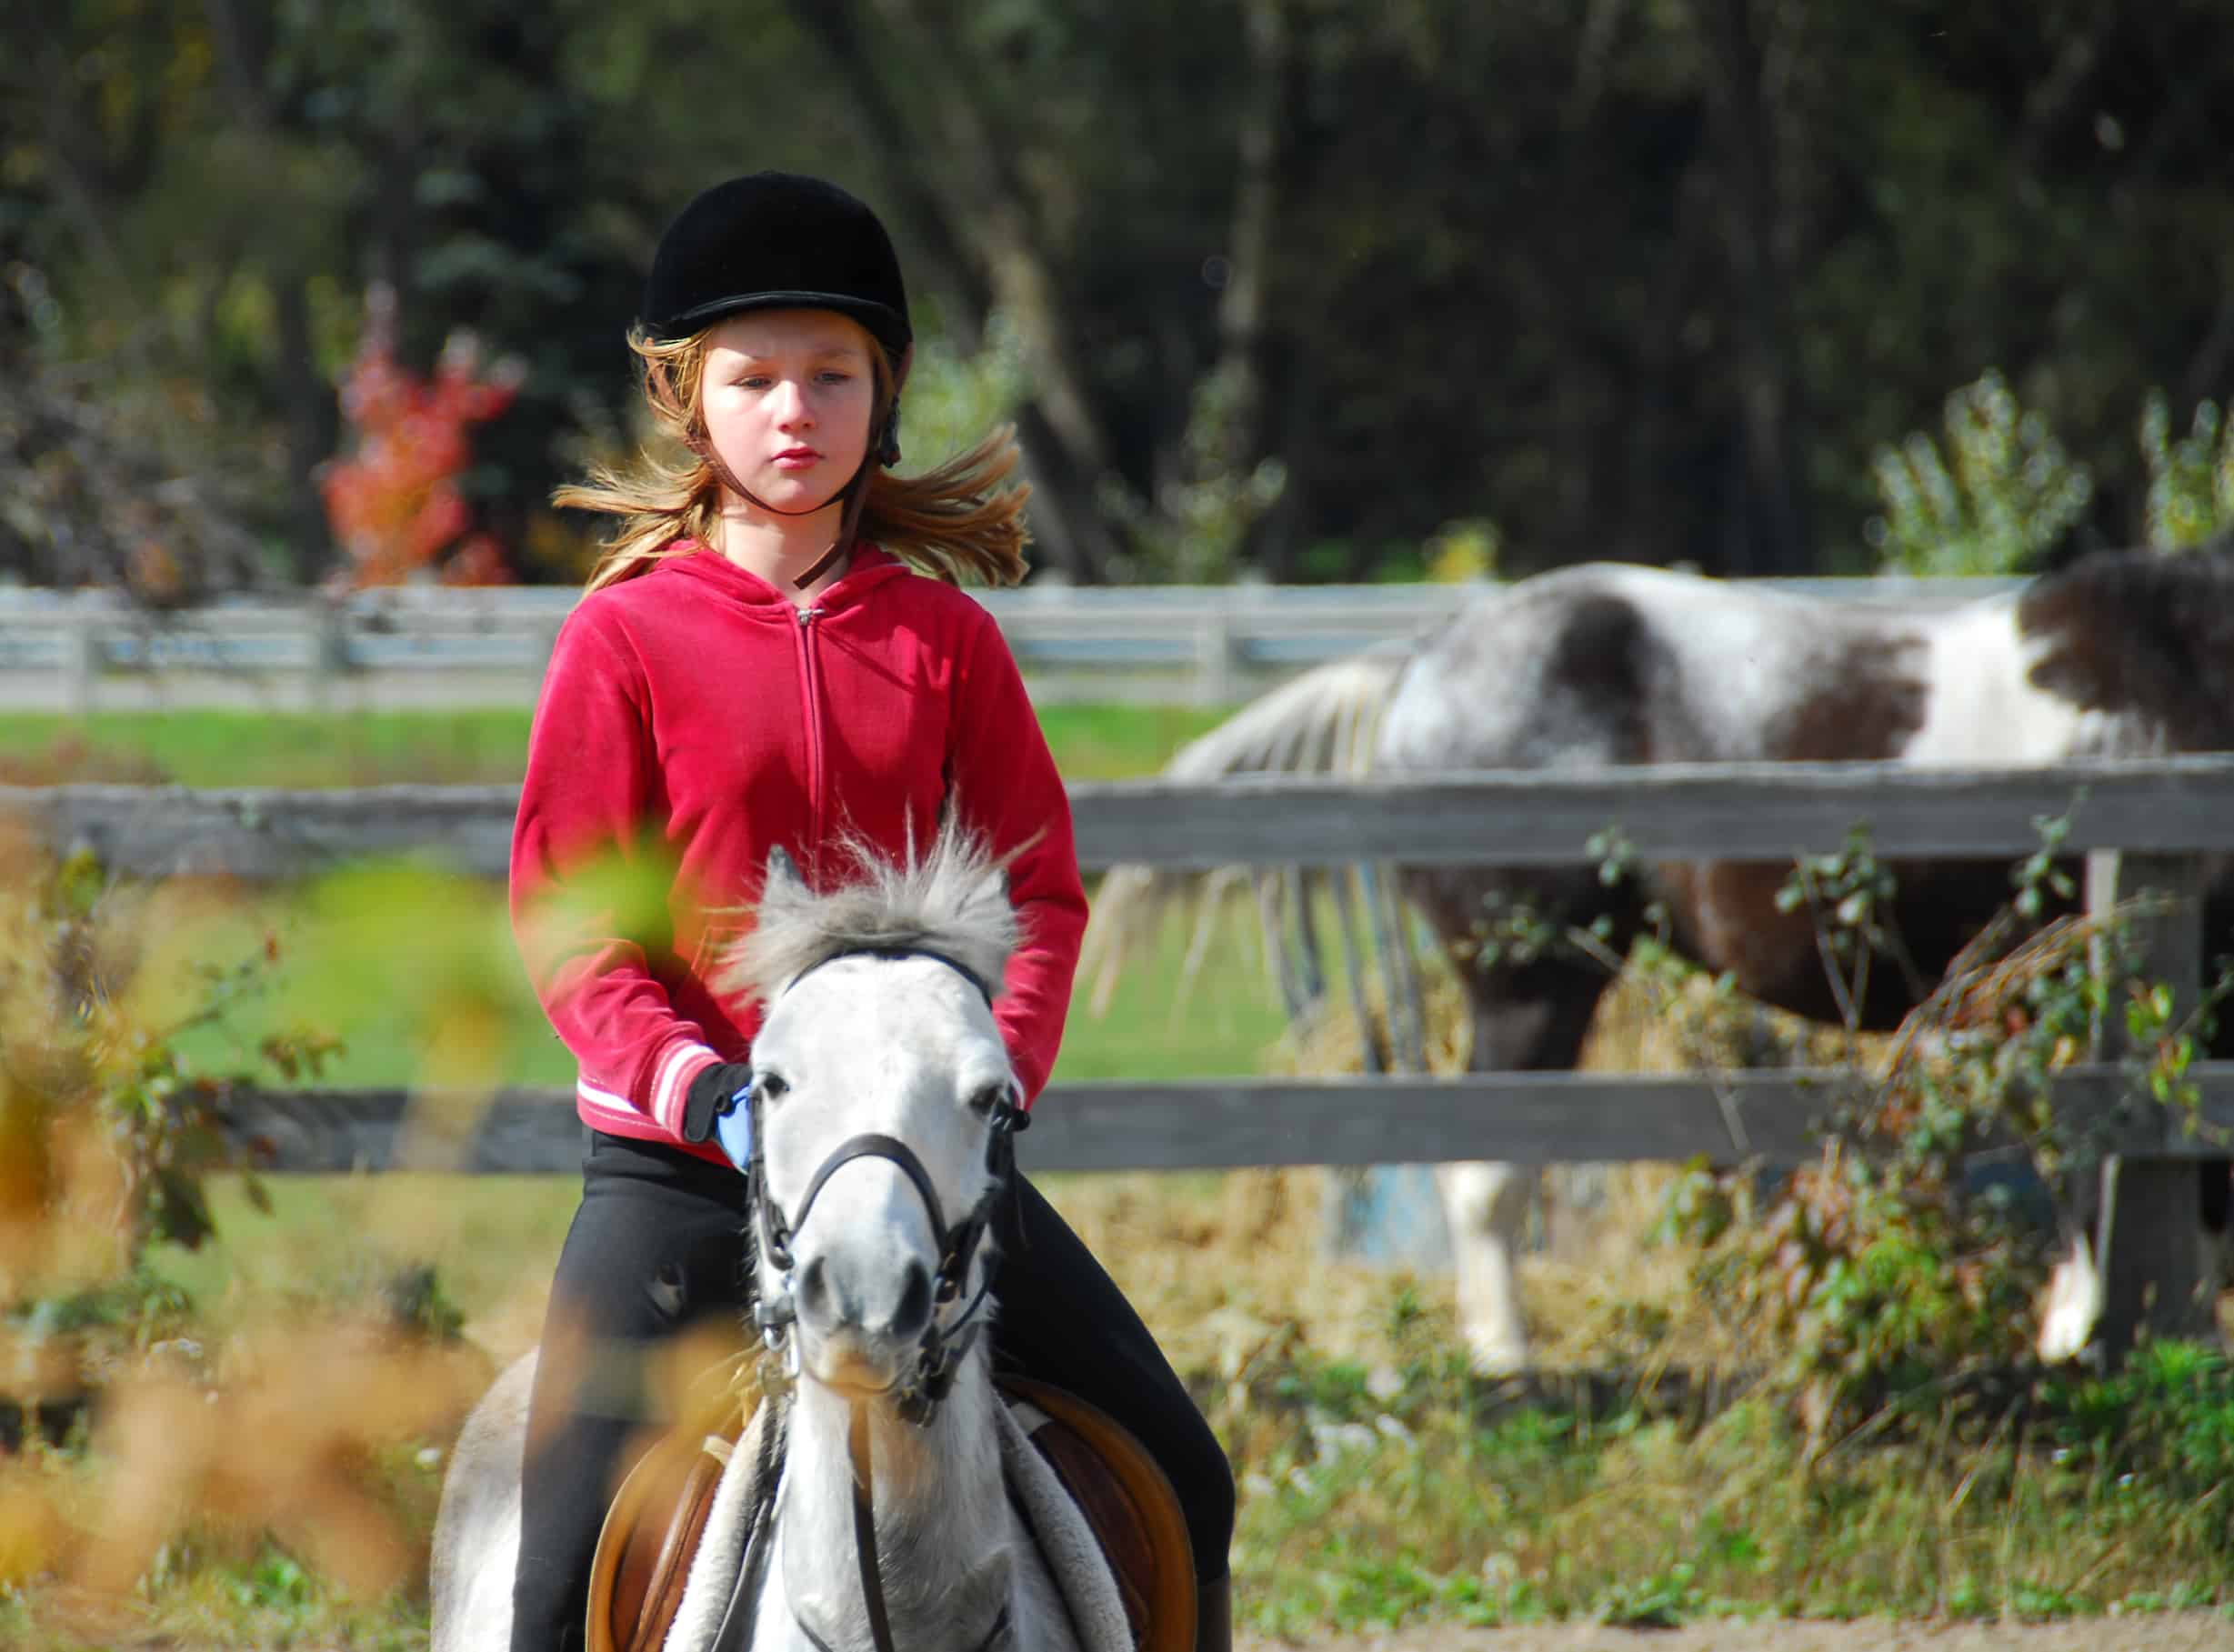 Young girl riding a white equine at countryside